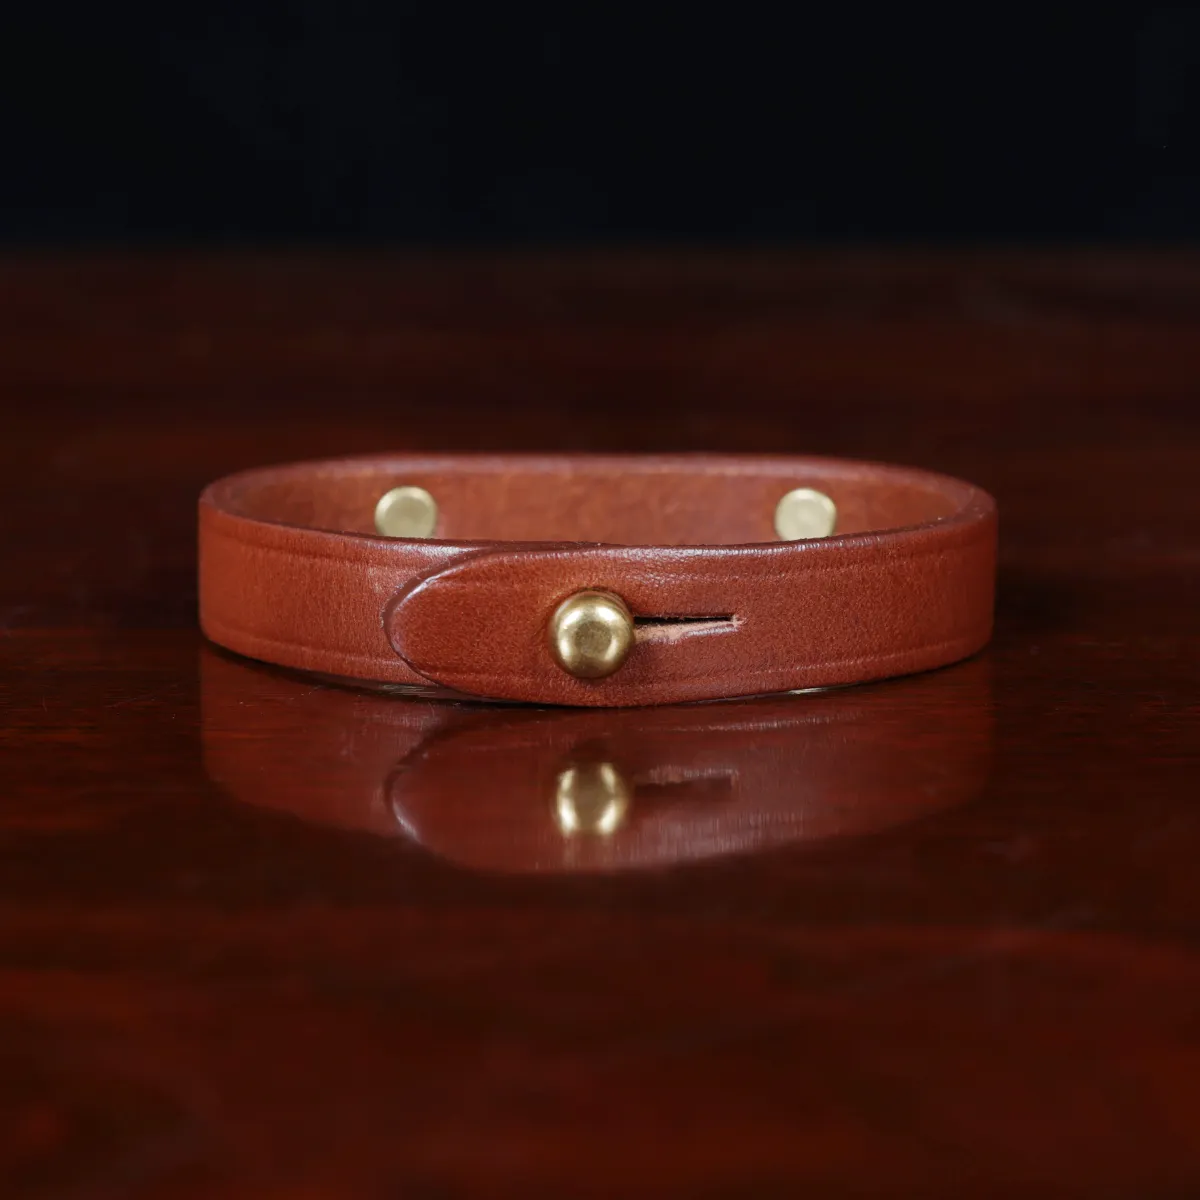 camp bracelet in vintage brown leather on a wooden table and a dark background - brass - back view